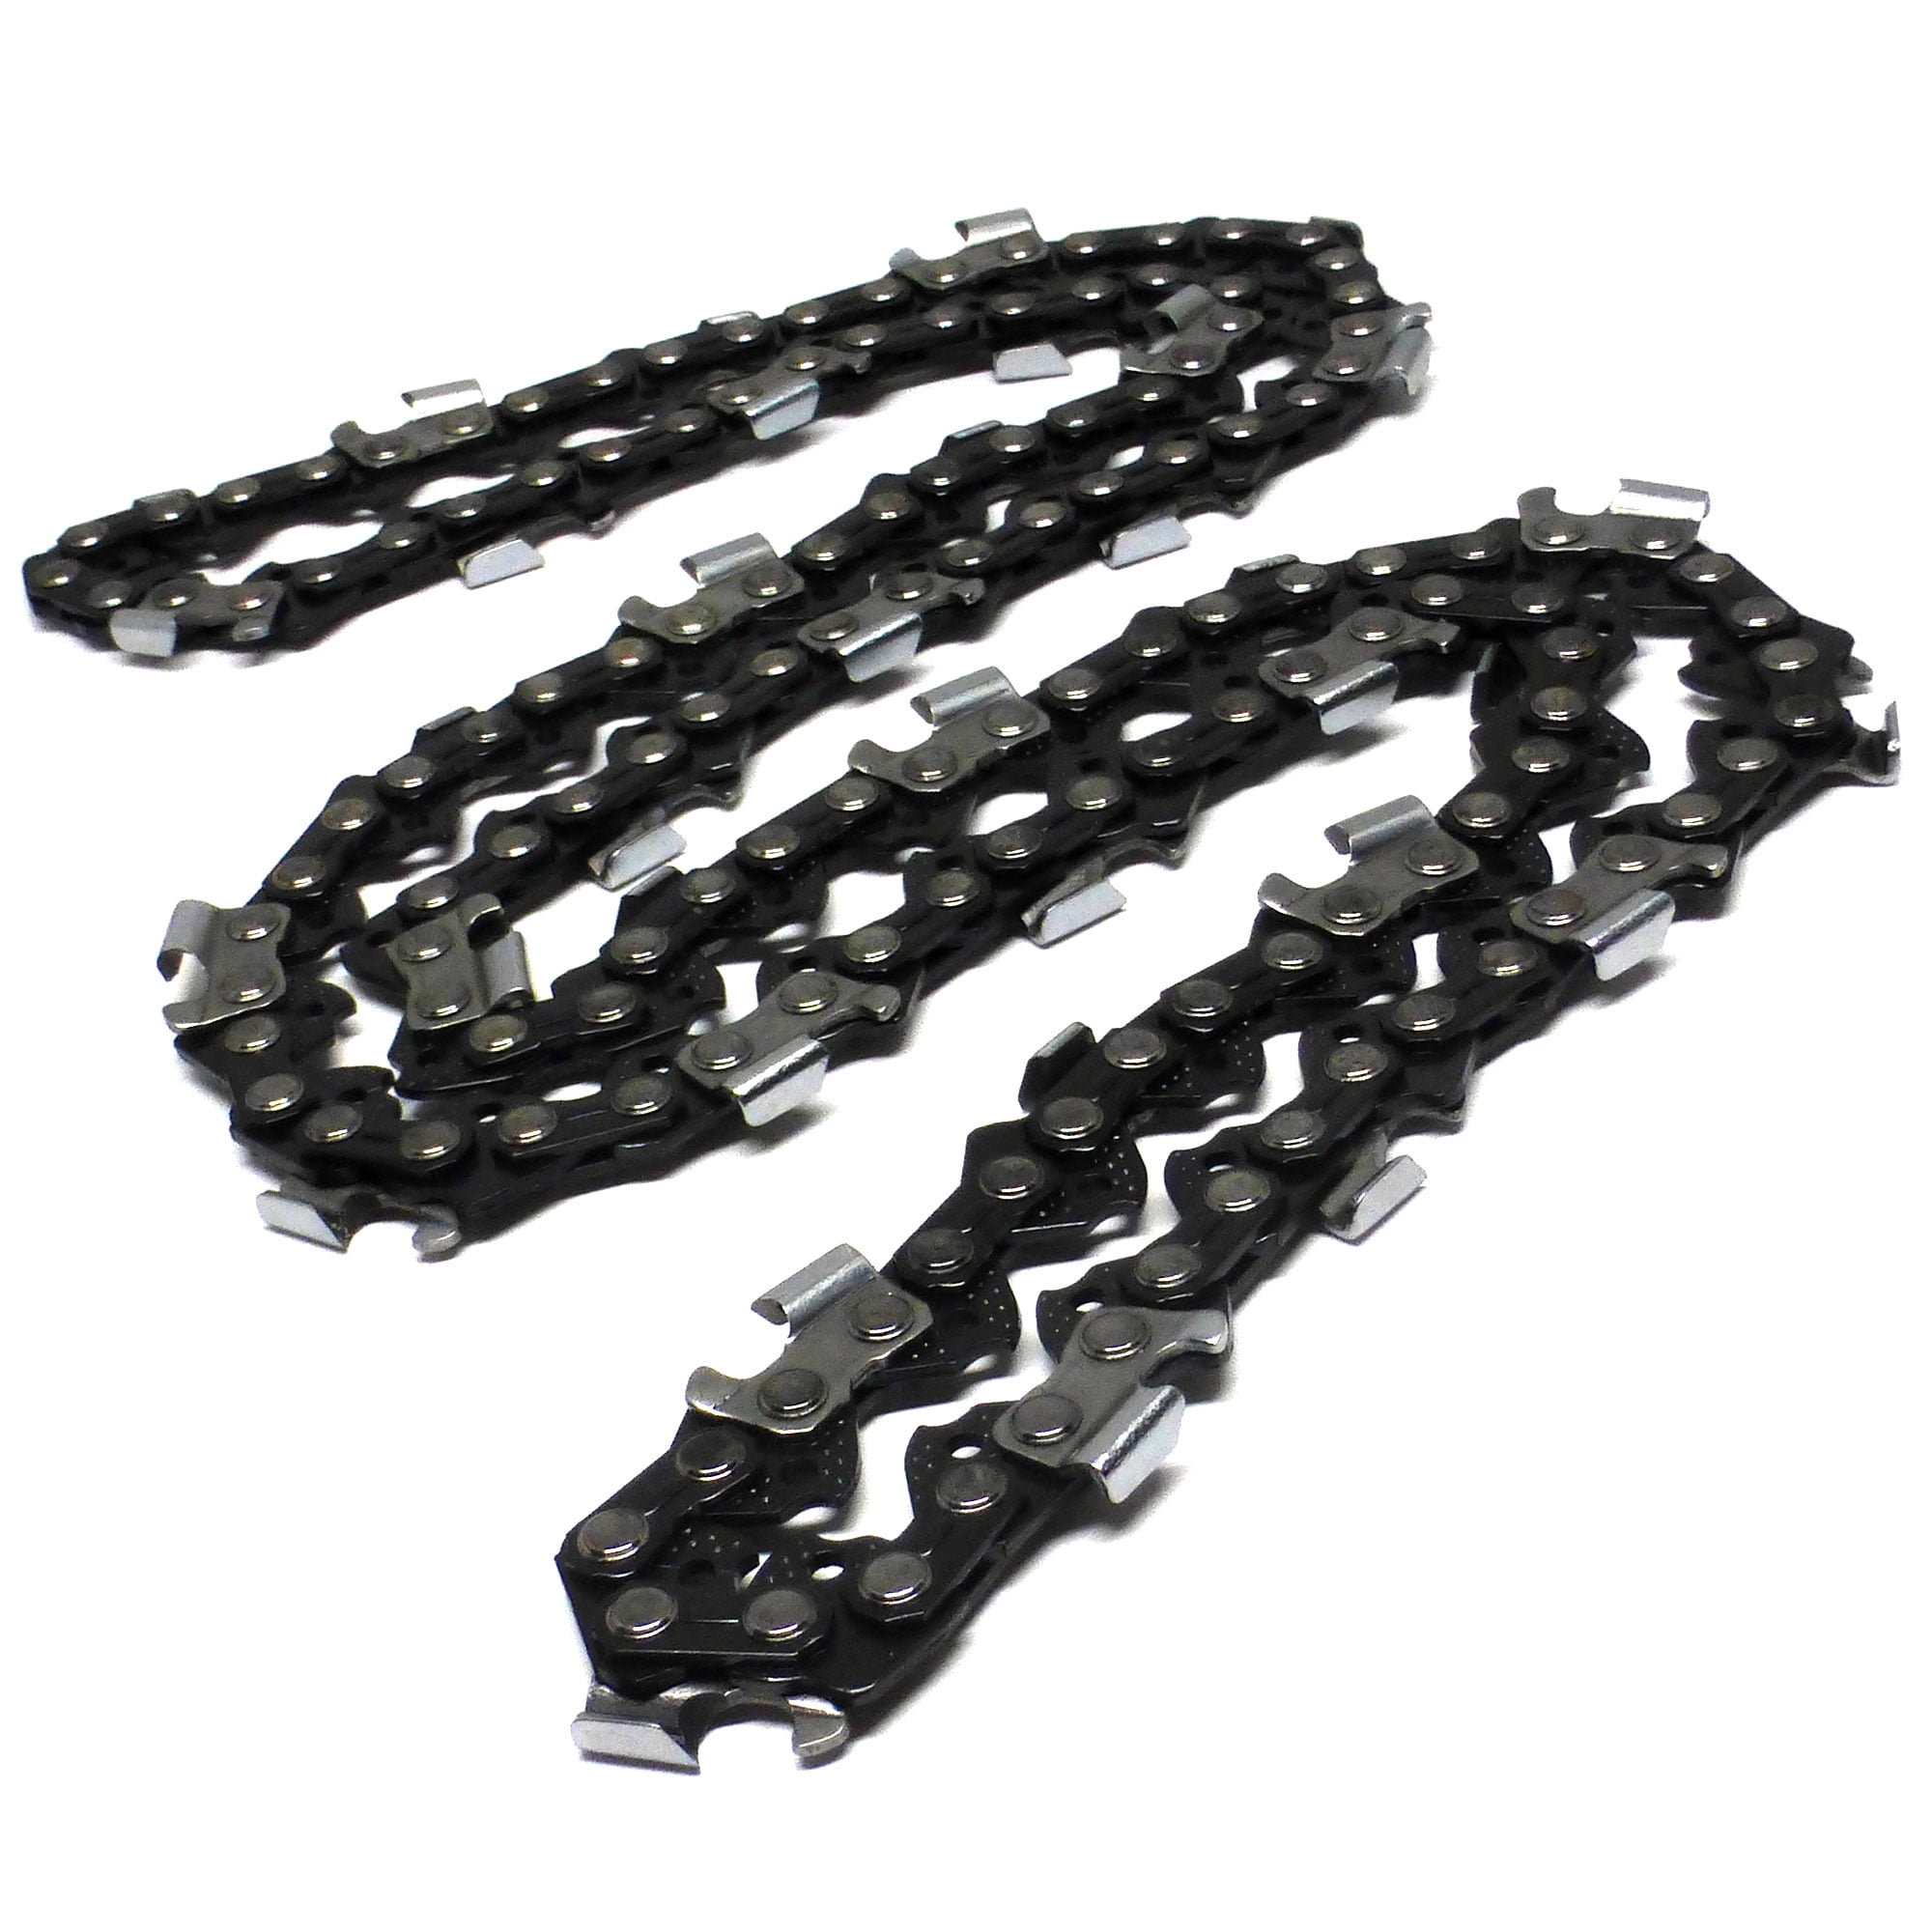 OREGON 20" D72 Replacement Chainsaw Chain Universal Part Low Kickback Smooth Cut 